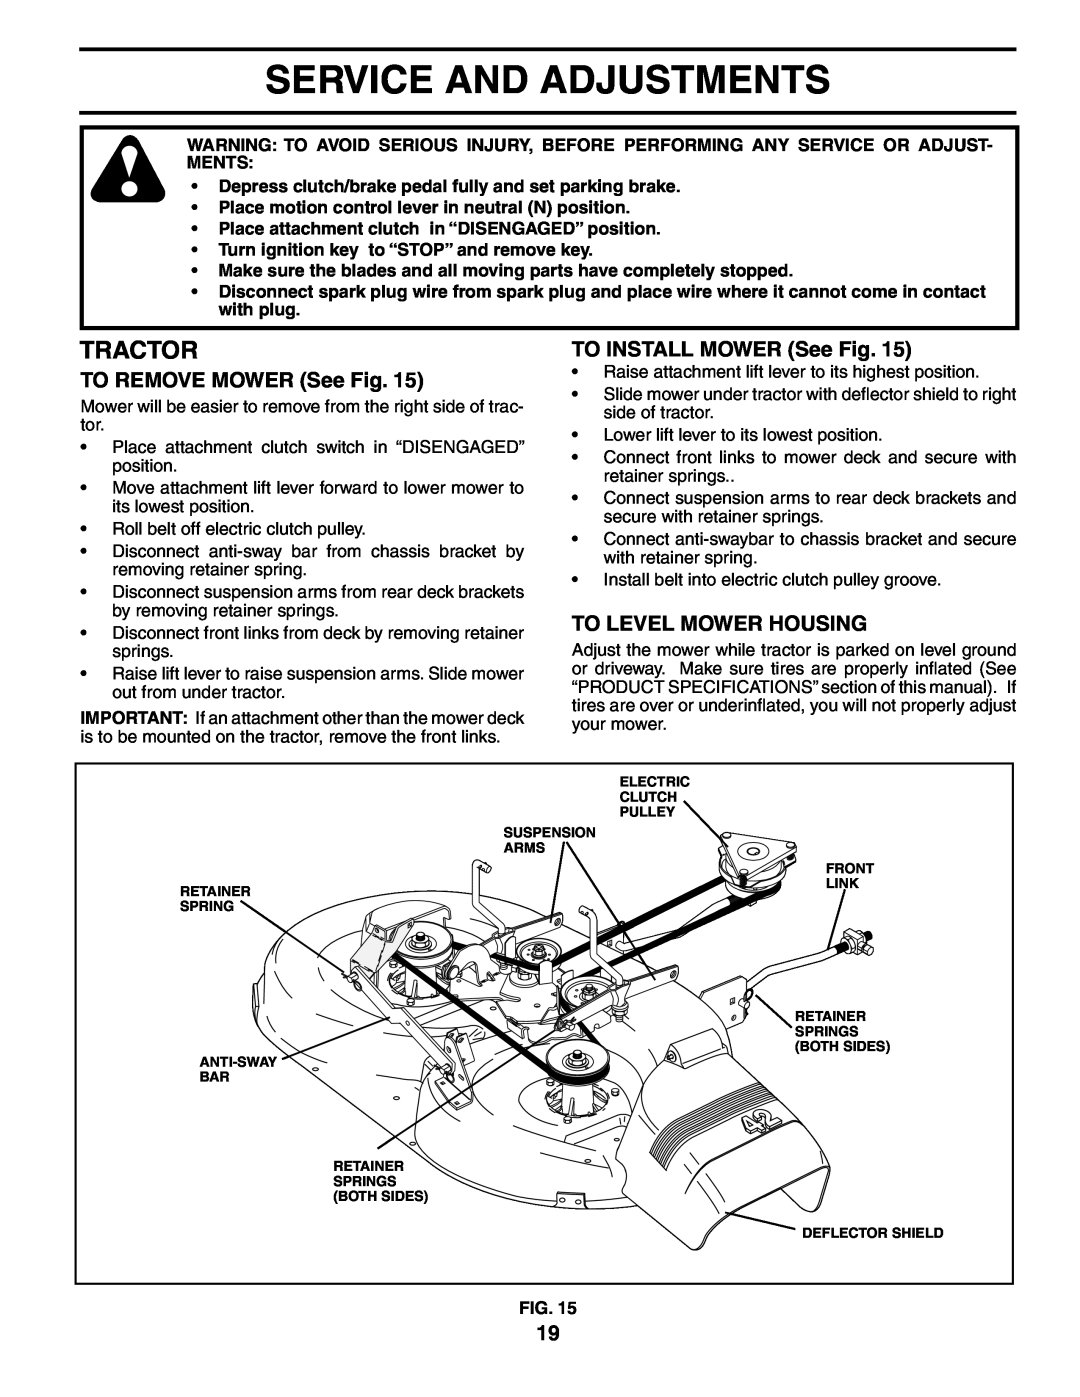 Poulan 195018 Service And Adjustments, TO REMOVE MOWER See Fig, TO INSTALL MOWER See Fig, To Level Mower Housing, Tractor 